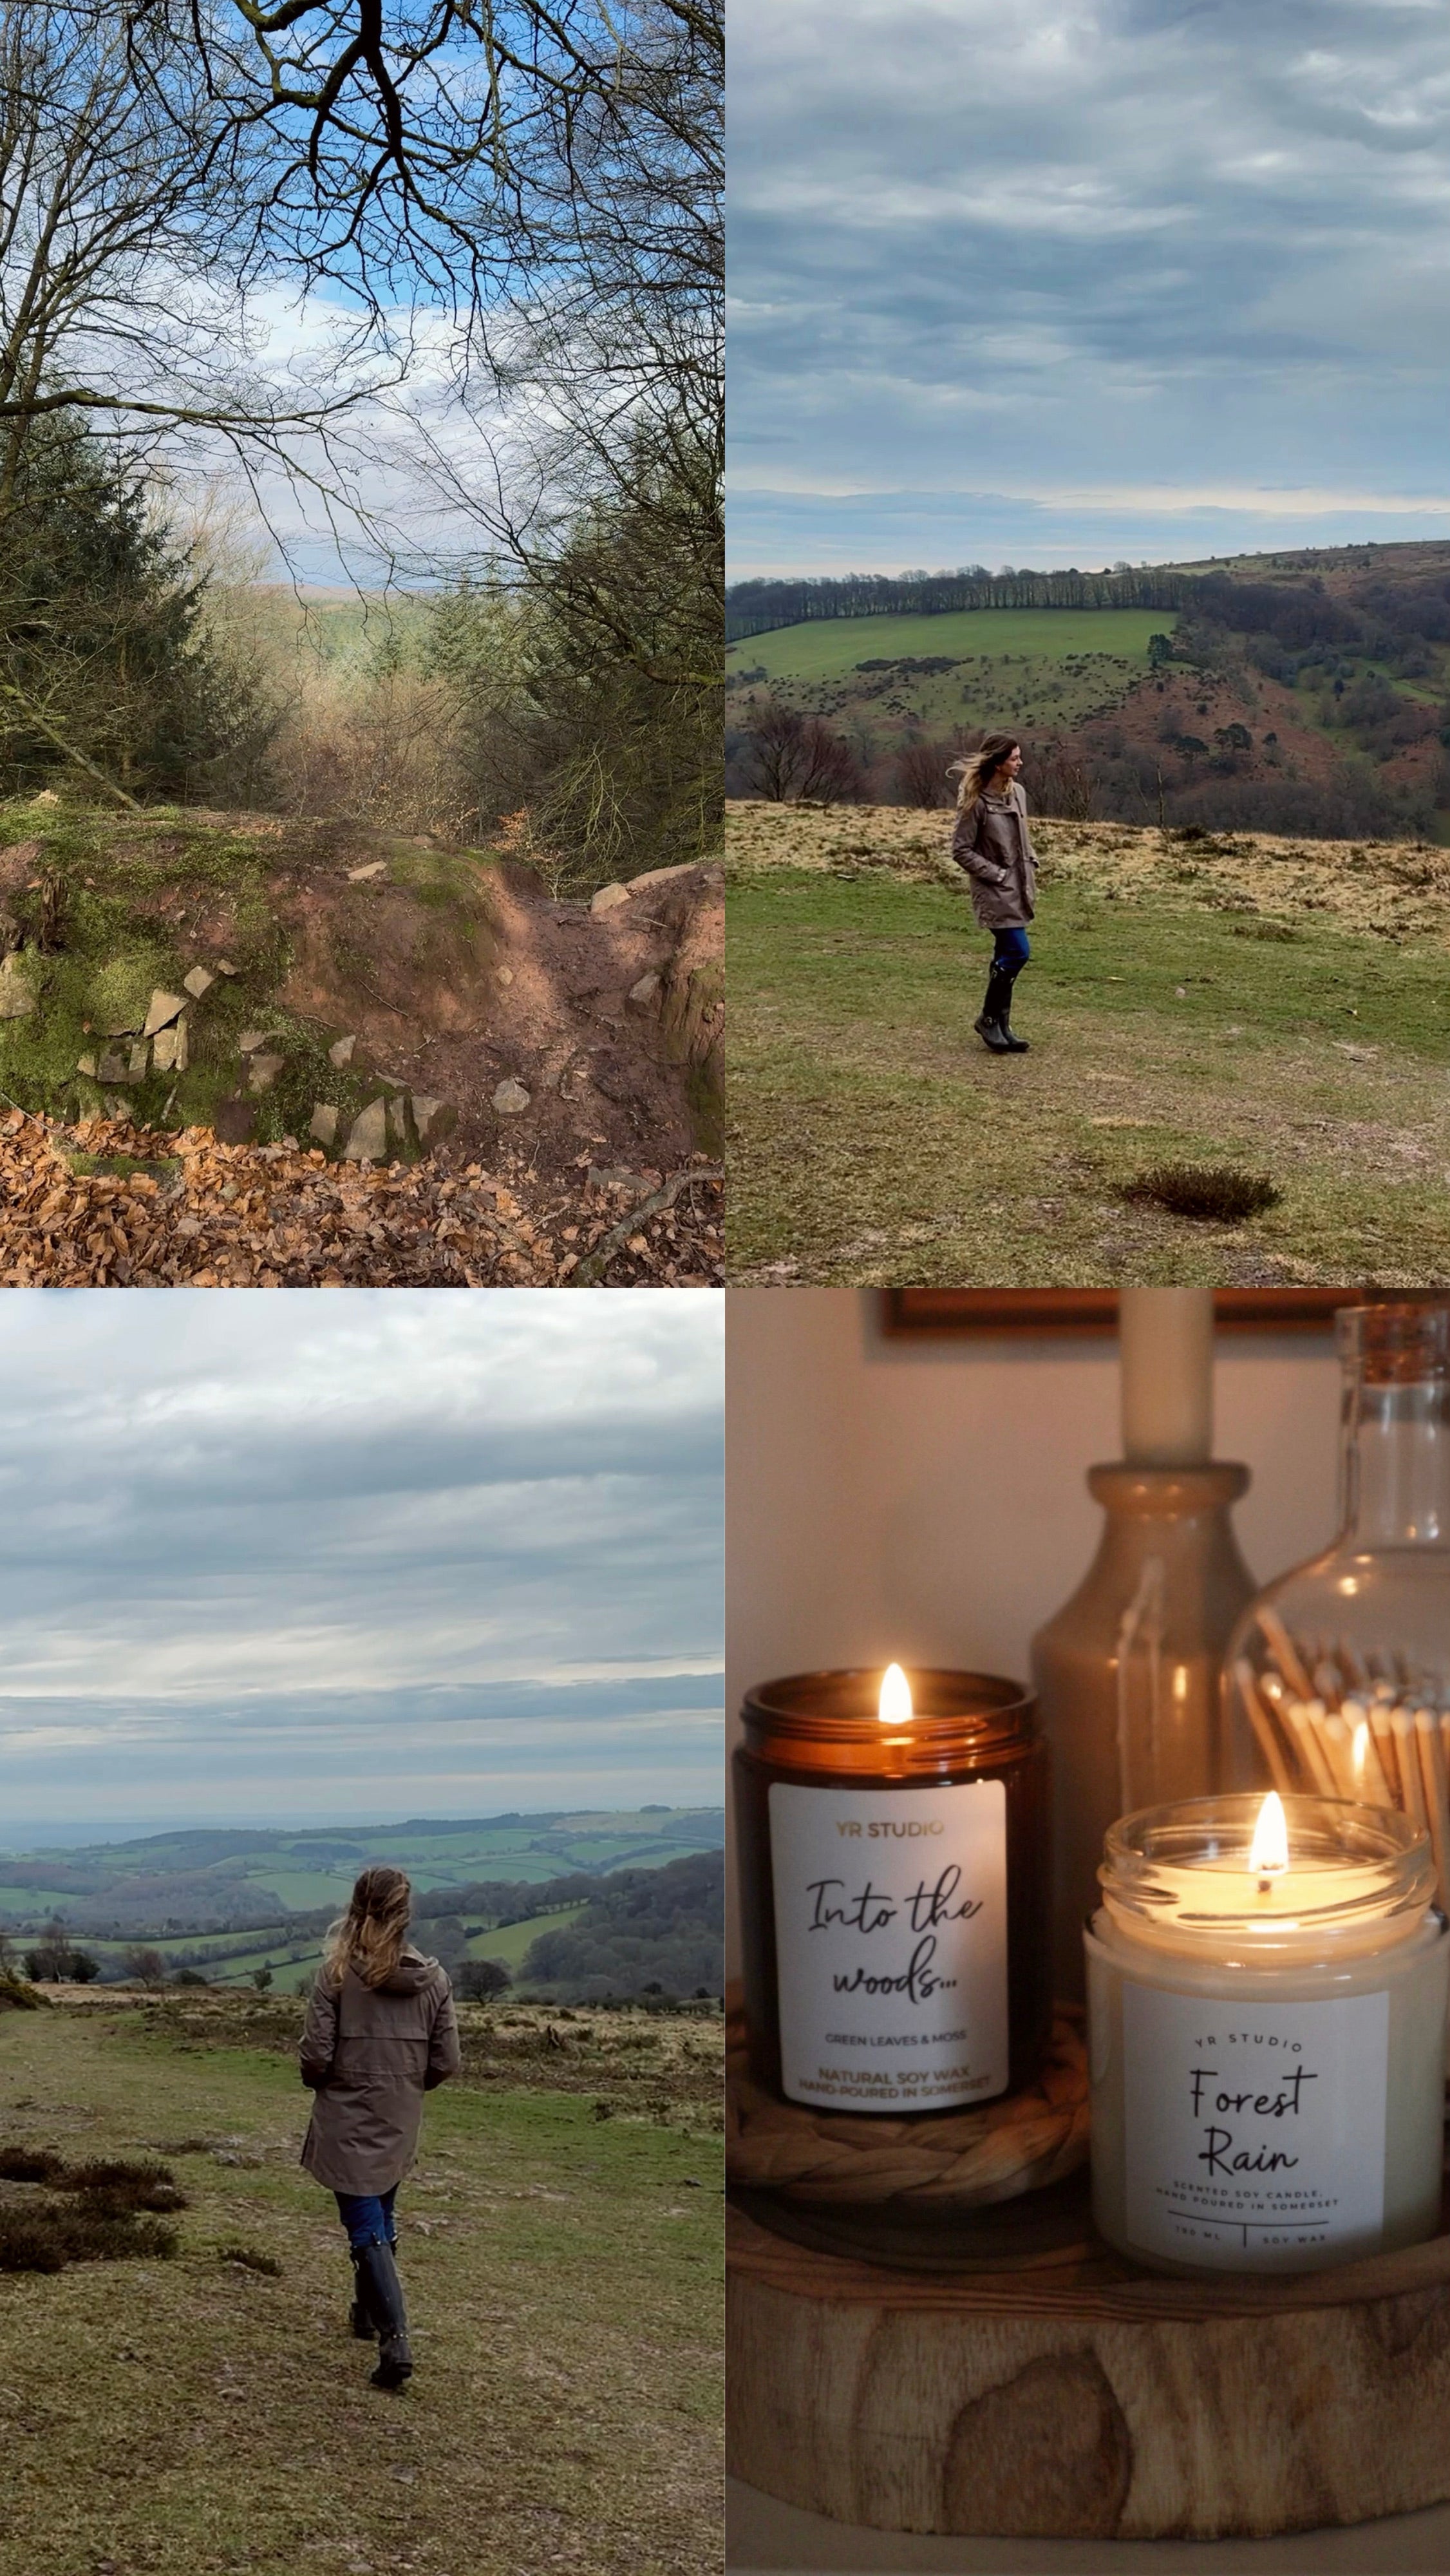 Slow Living Through the Late Winter Landscape of the English Countryside